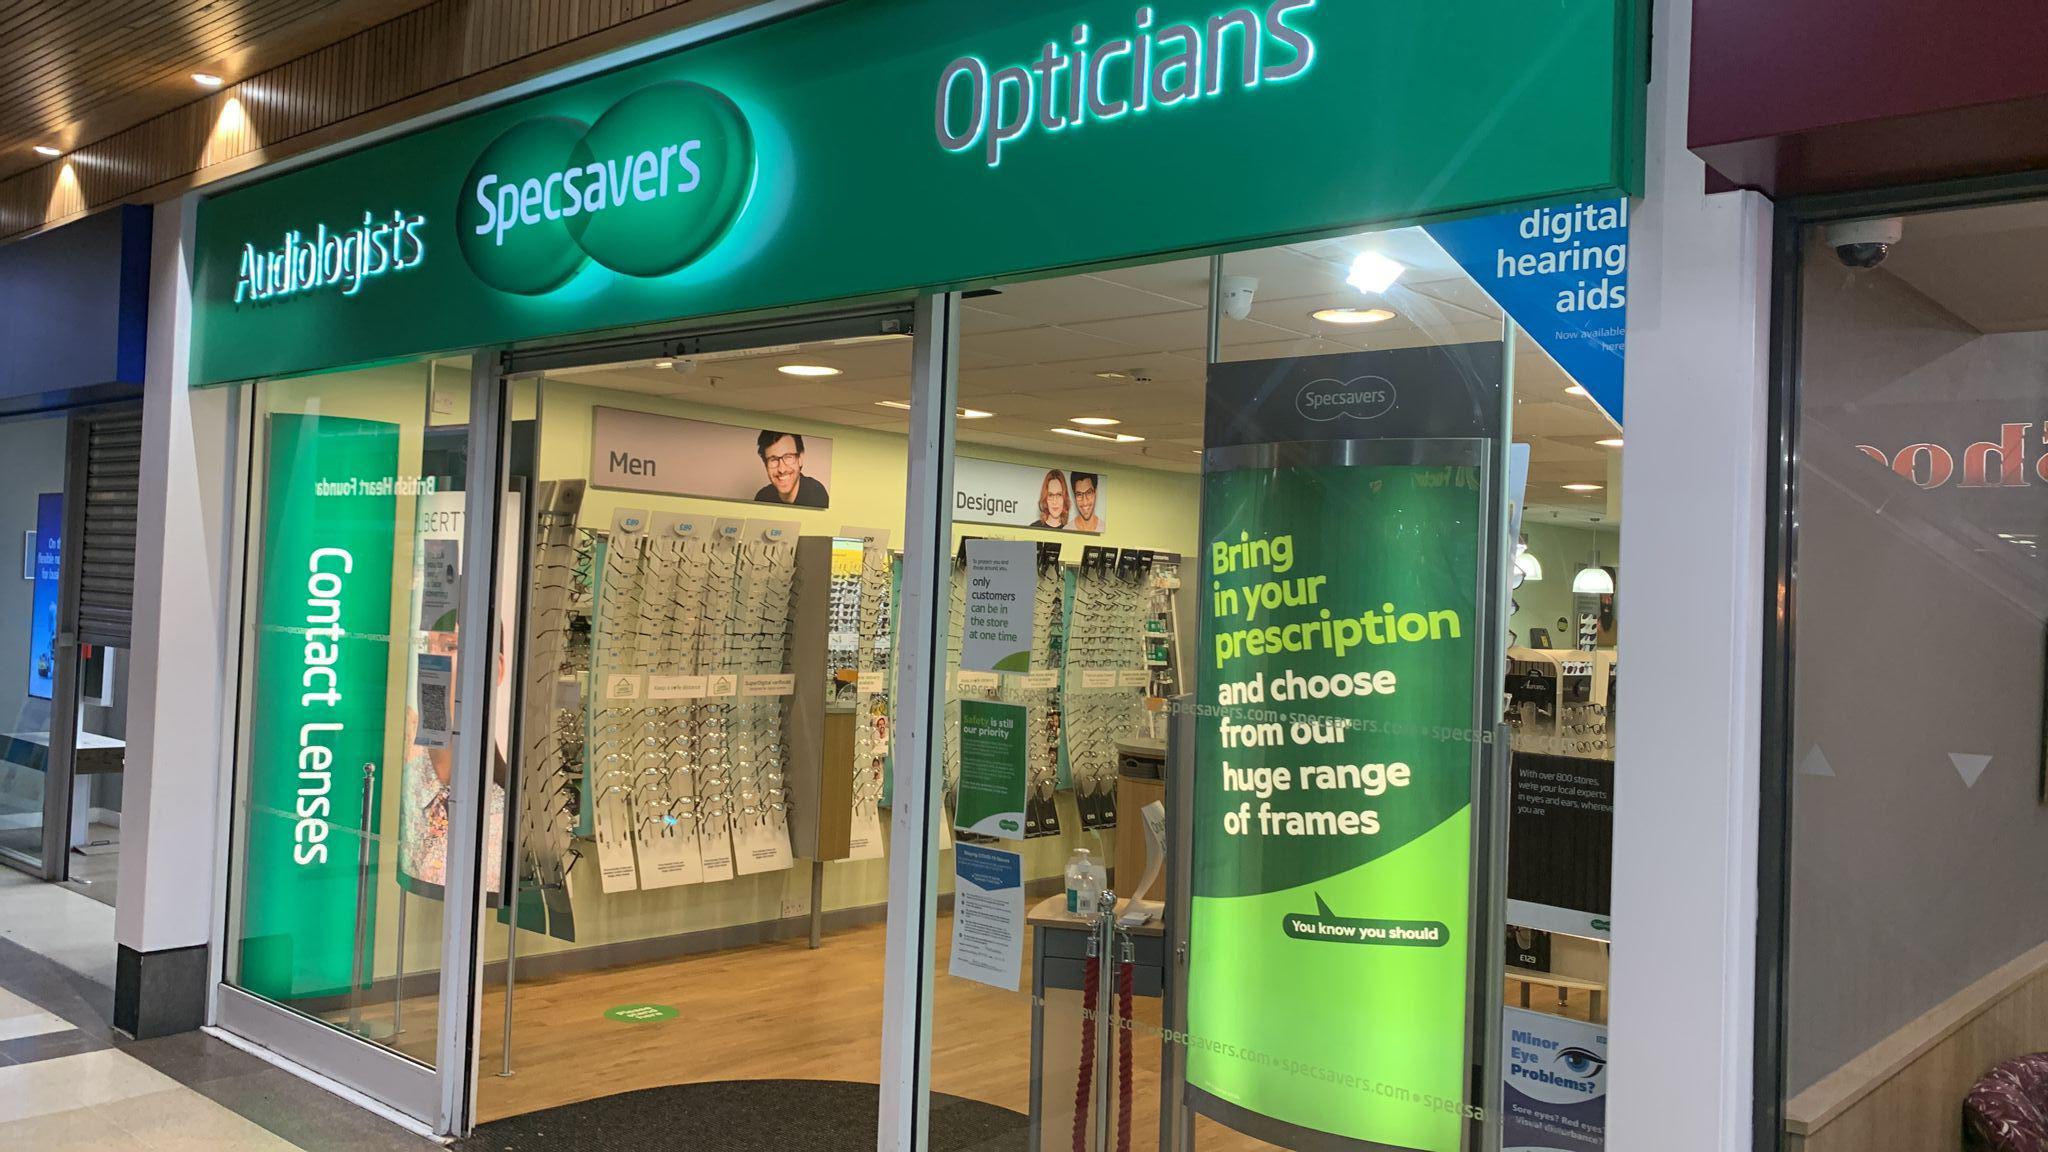 Middleton Specsavers Specsavers Opticians and Audiologists - Middleton Manchester 01616 540440